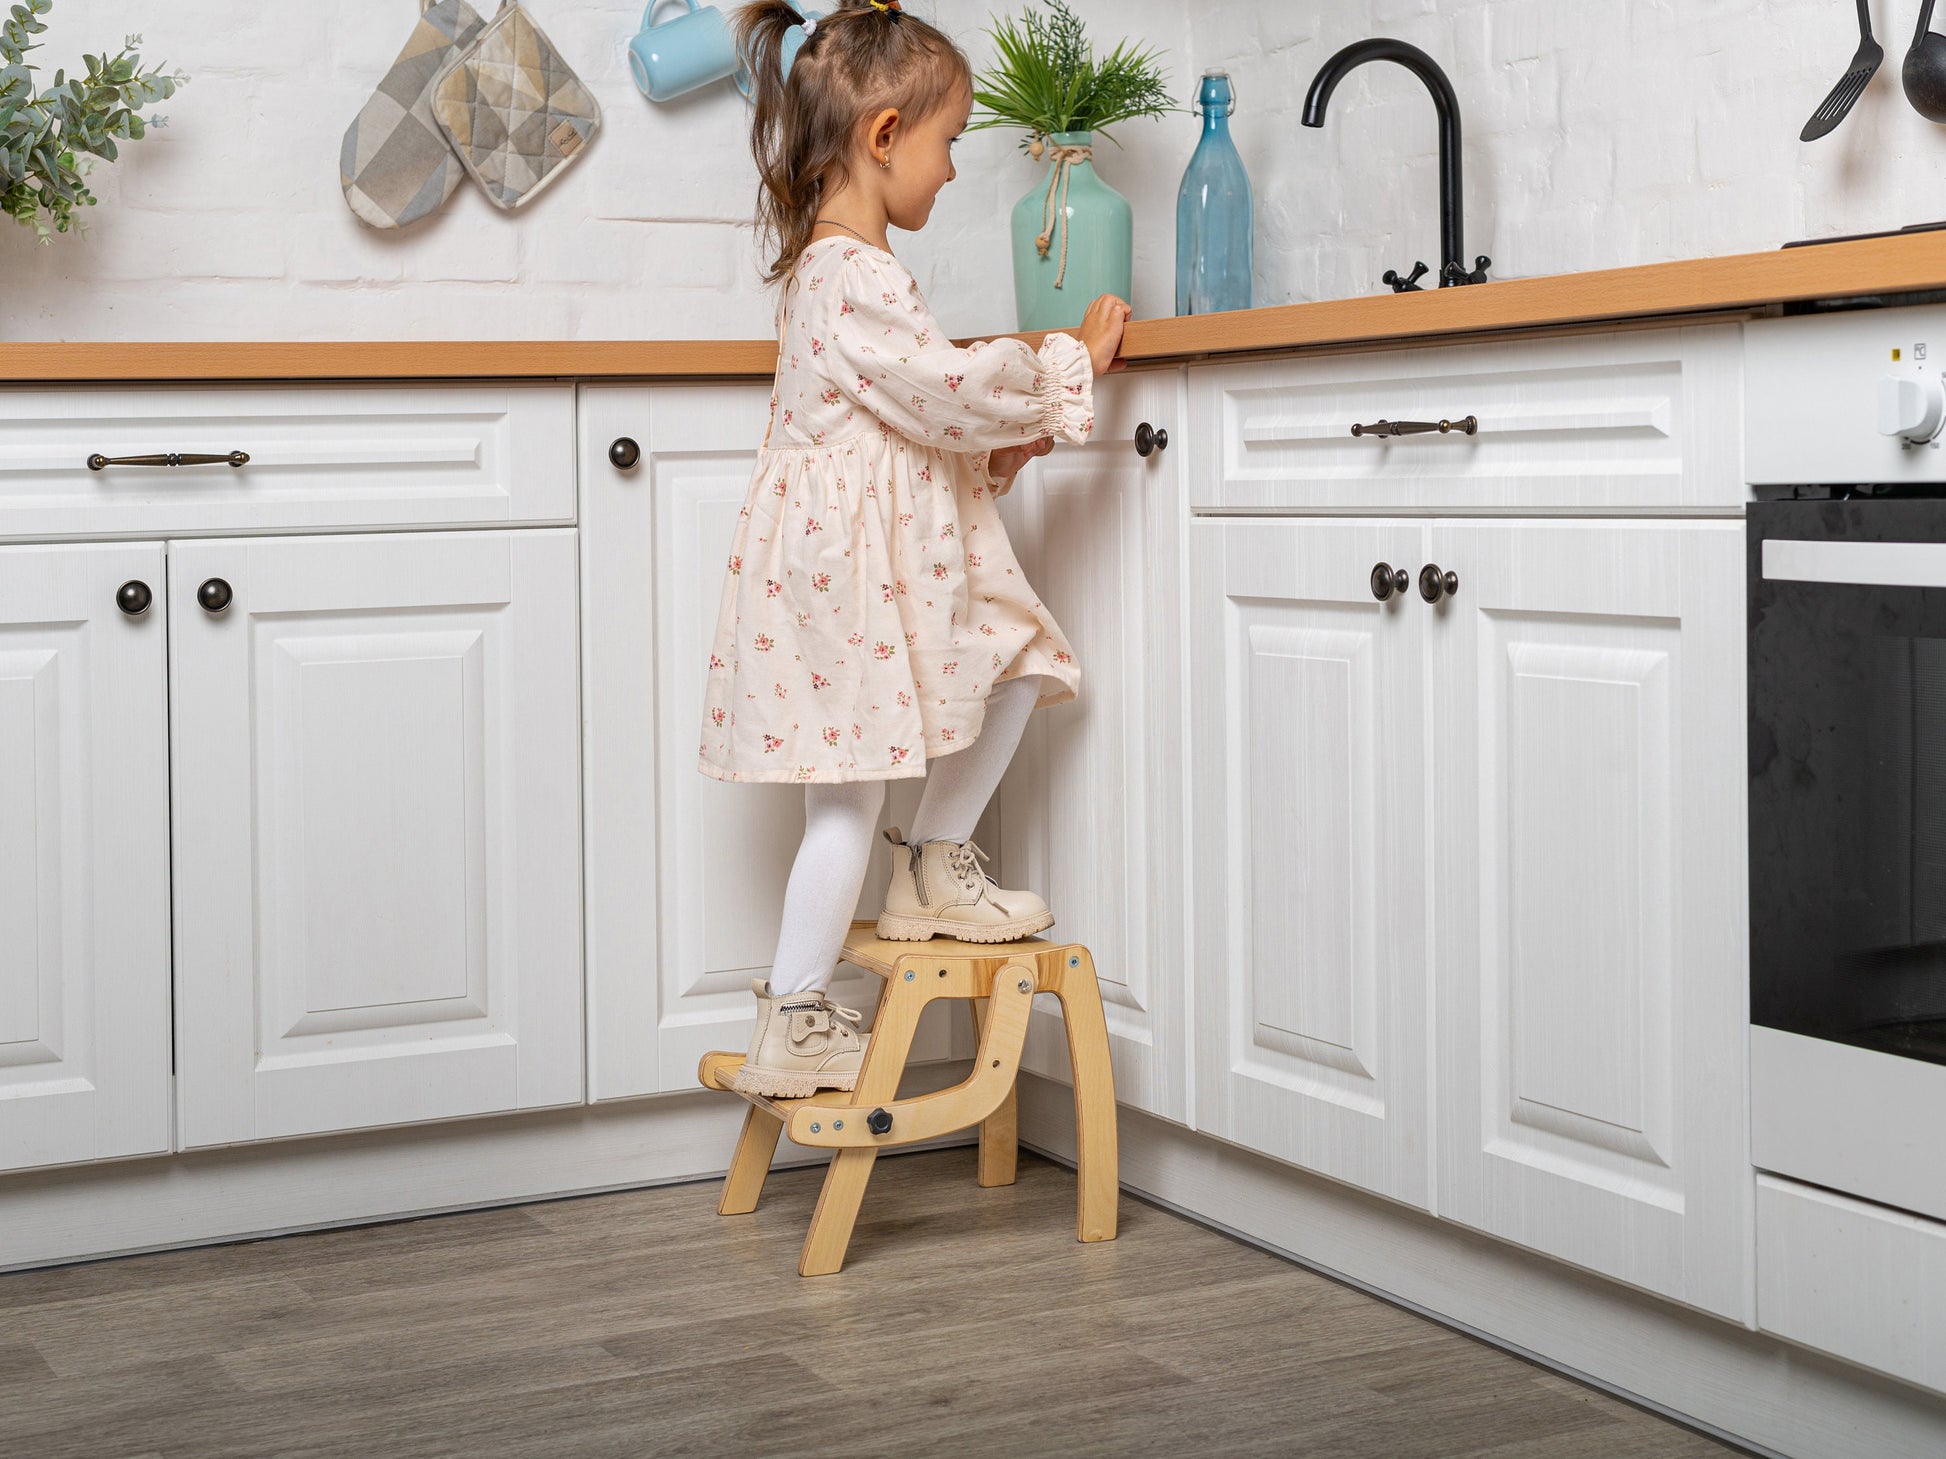 Convertible step stool & chair 2in1, toddler step stool